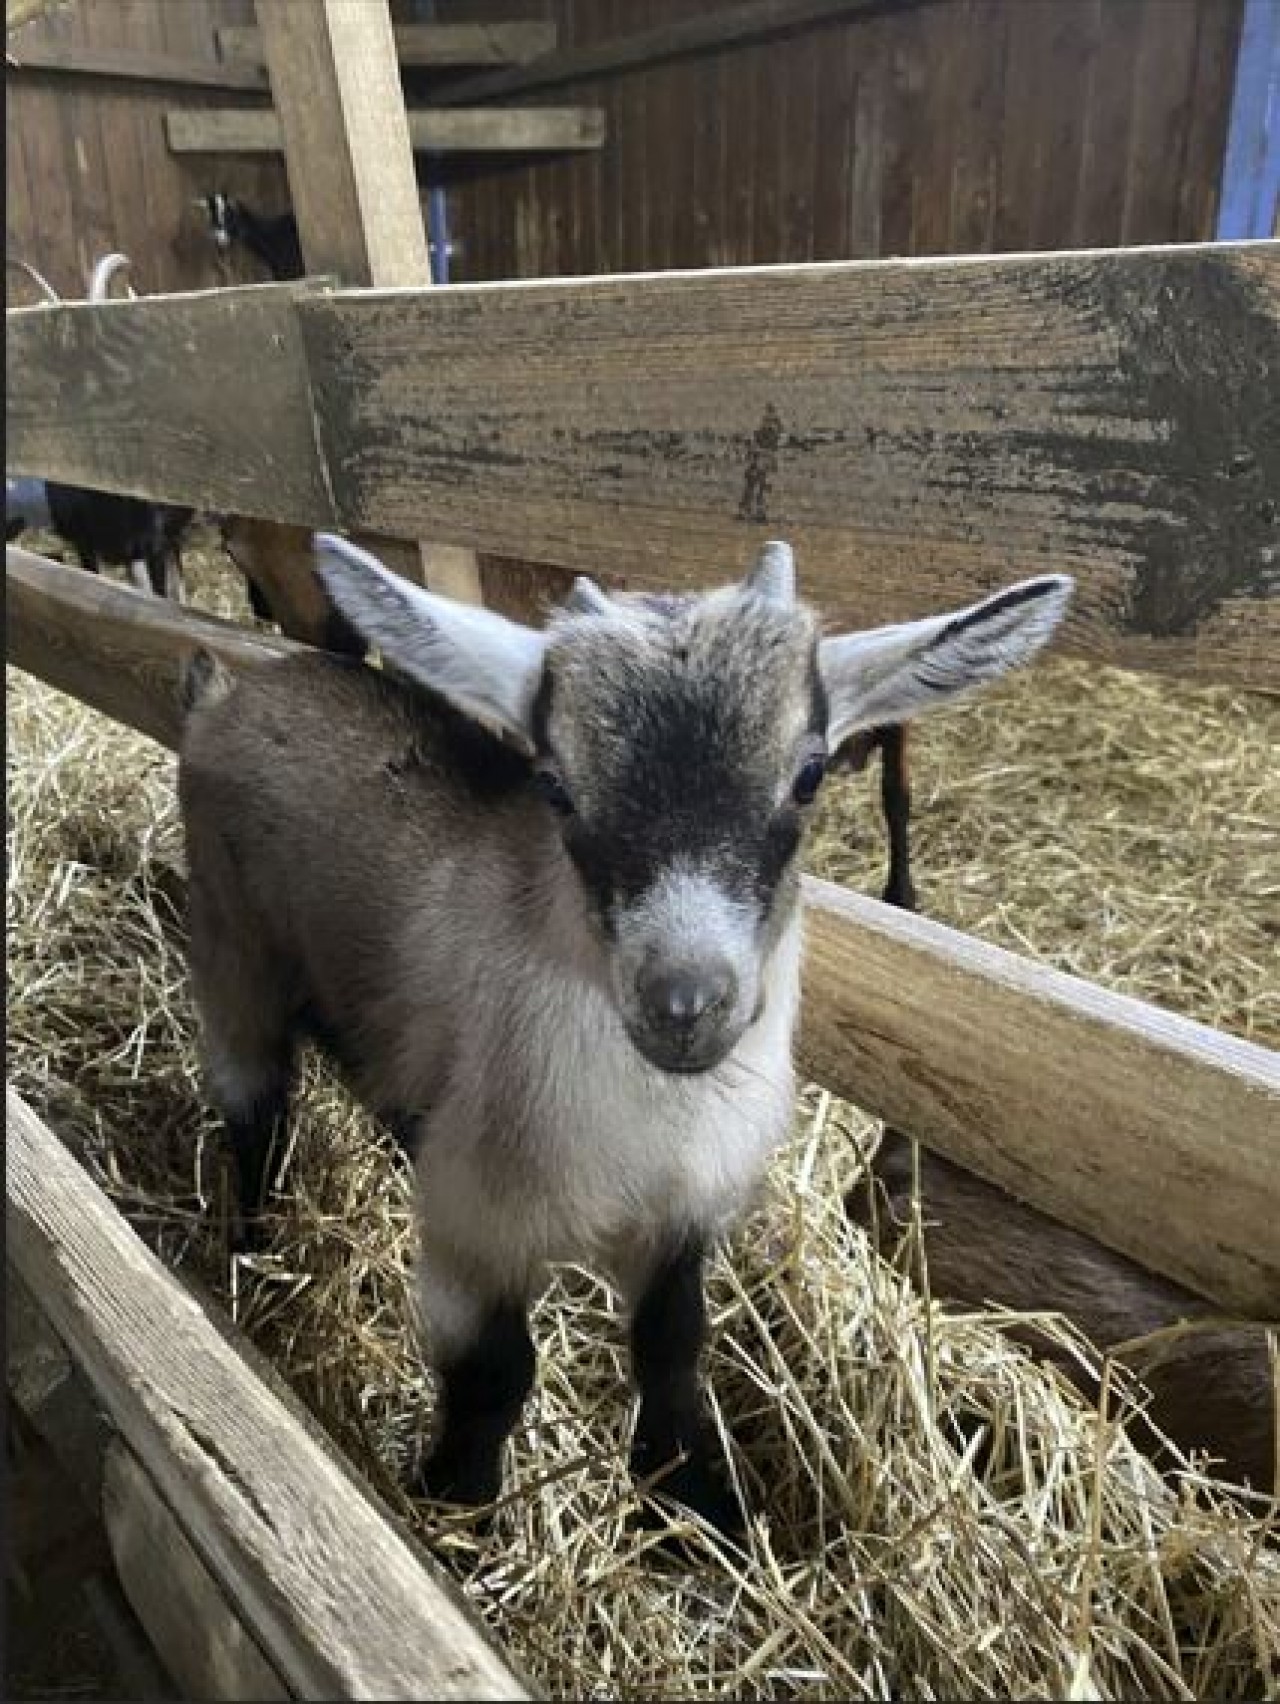 News from Goat Farm